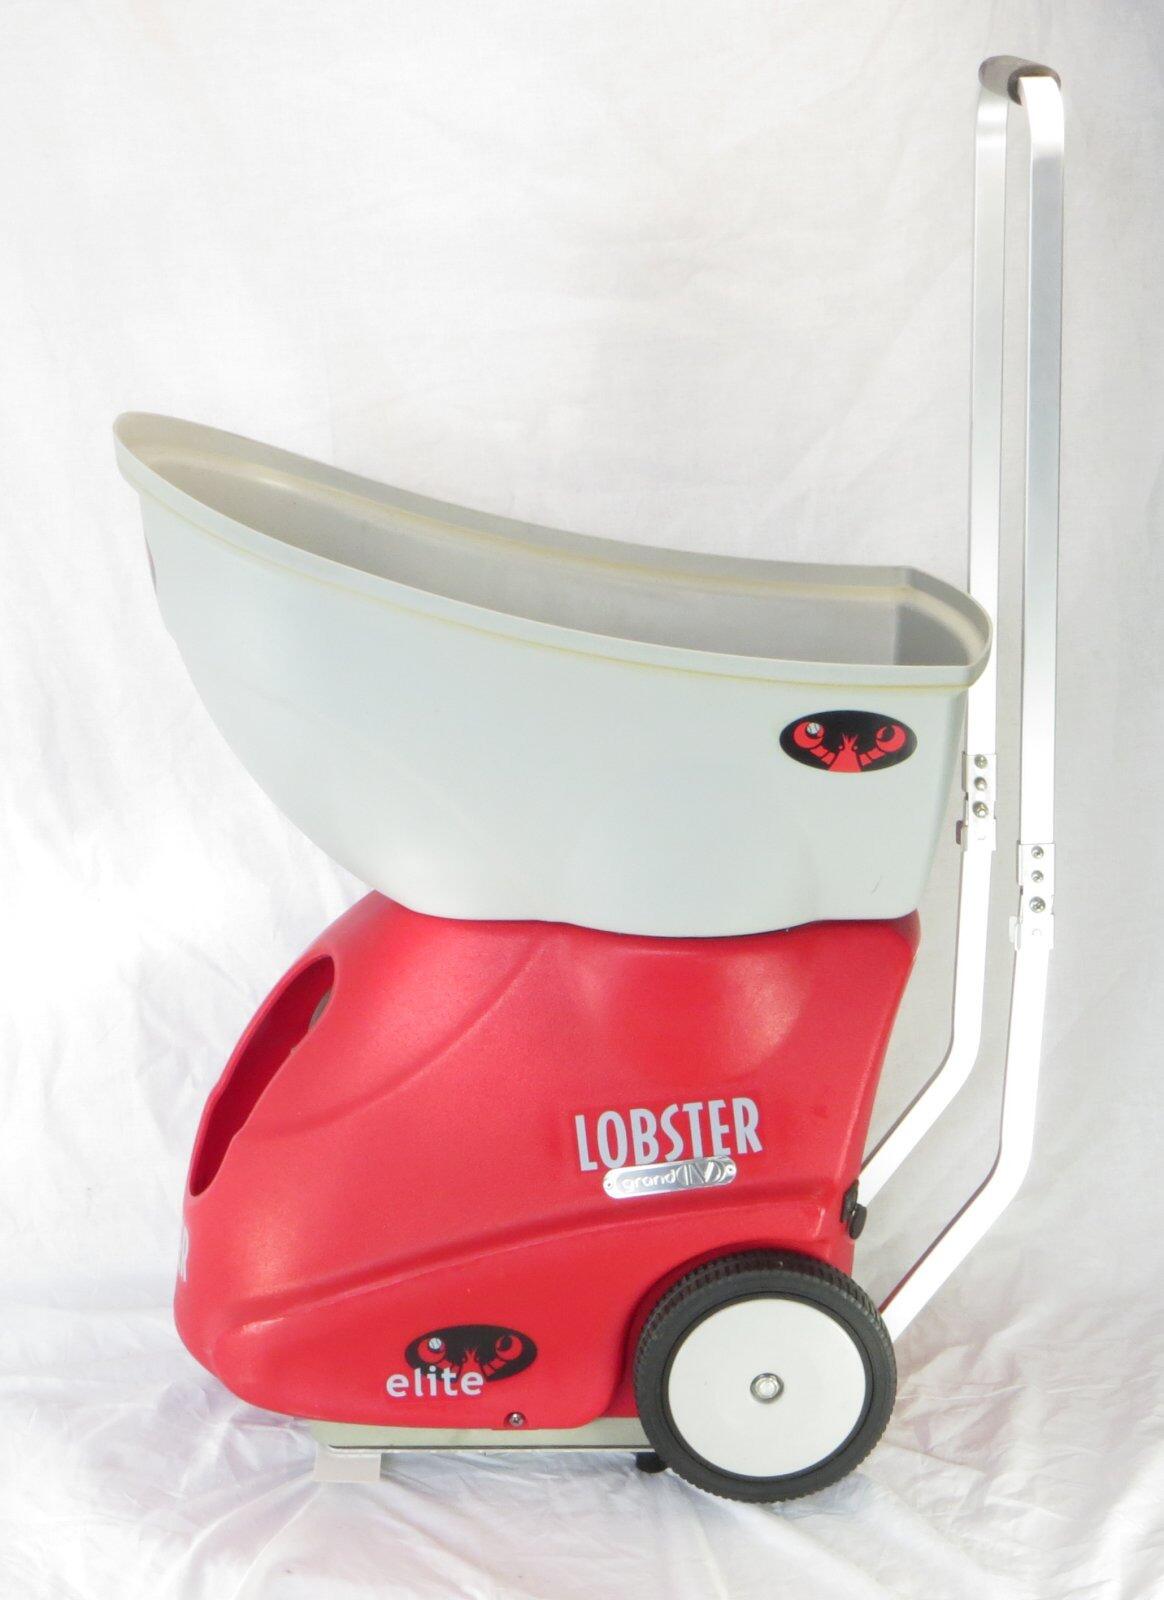 Lobster Elite Grand 4 used, reconditioned for sale